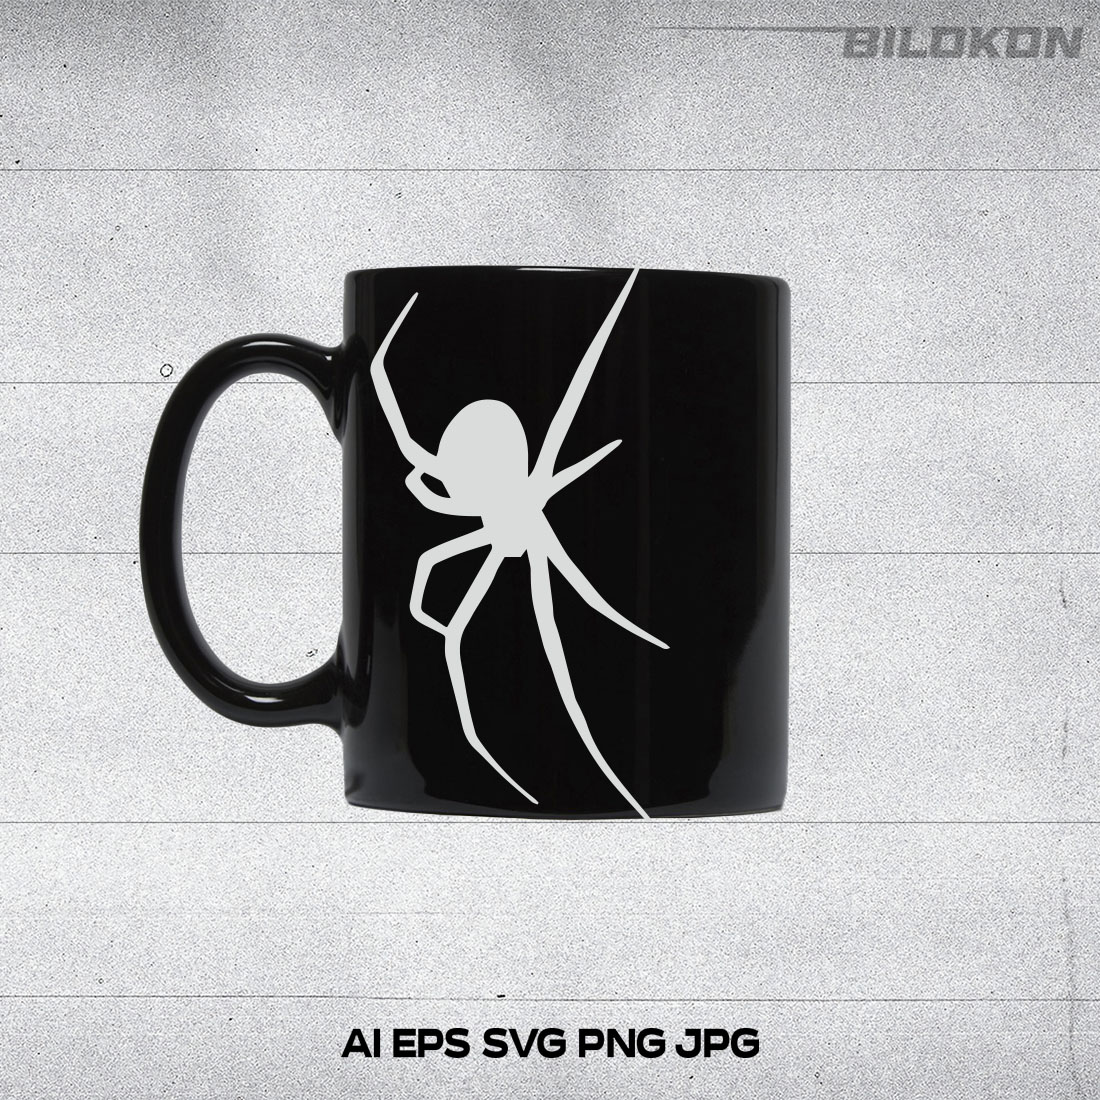 Black coffee mug with a white spider on it.